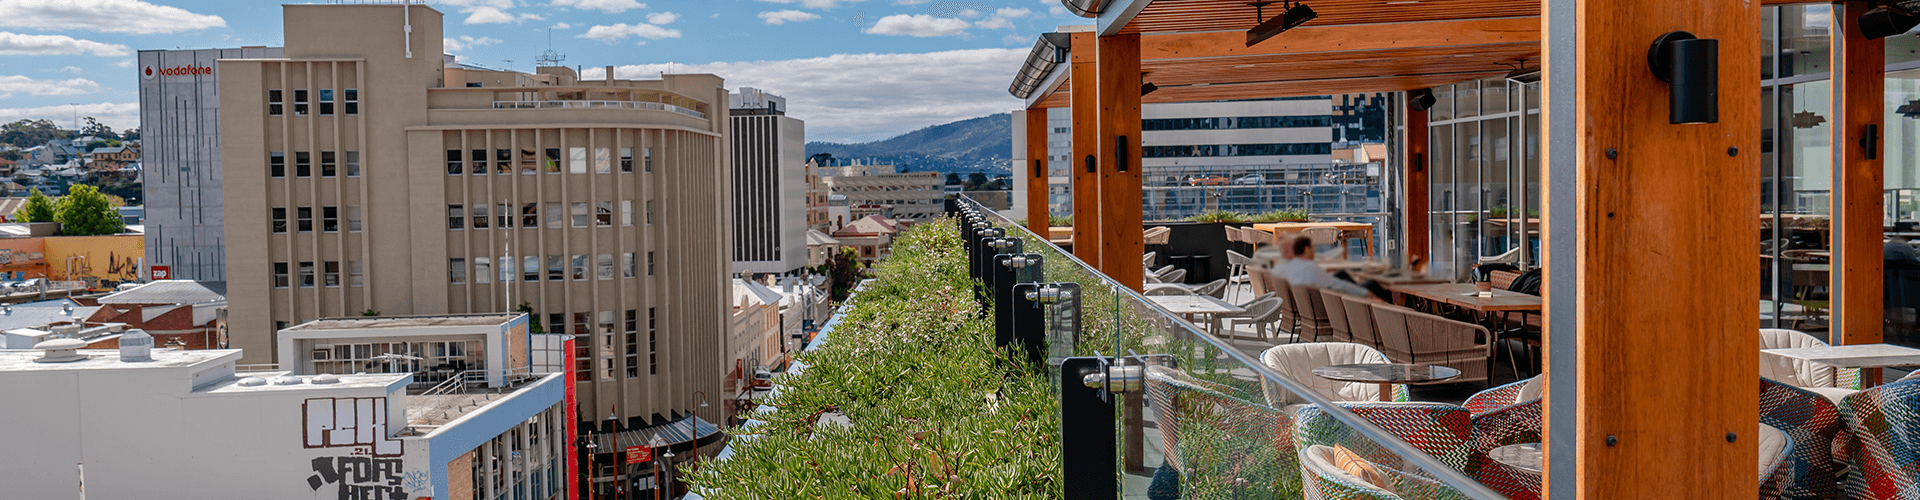 WaterUps is being used in Rooftop Gardens across Australia to simplify watering and grow healthy plants.